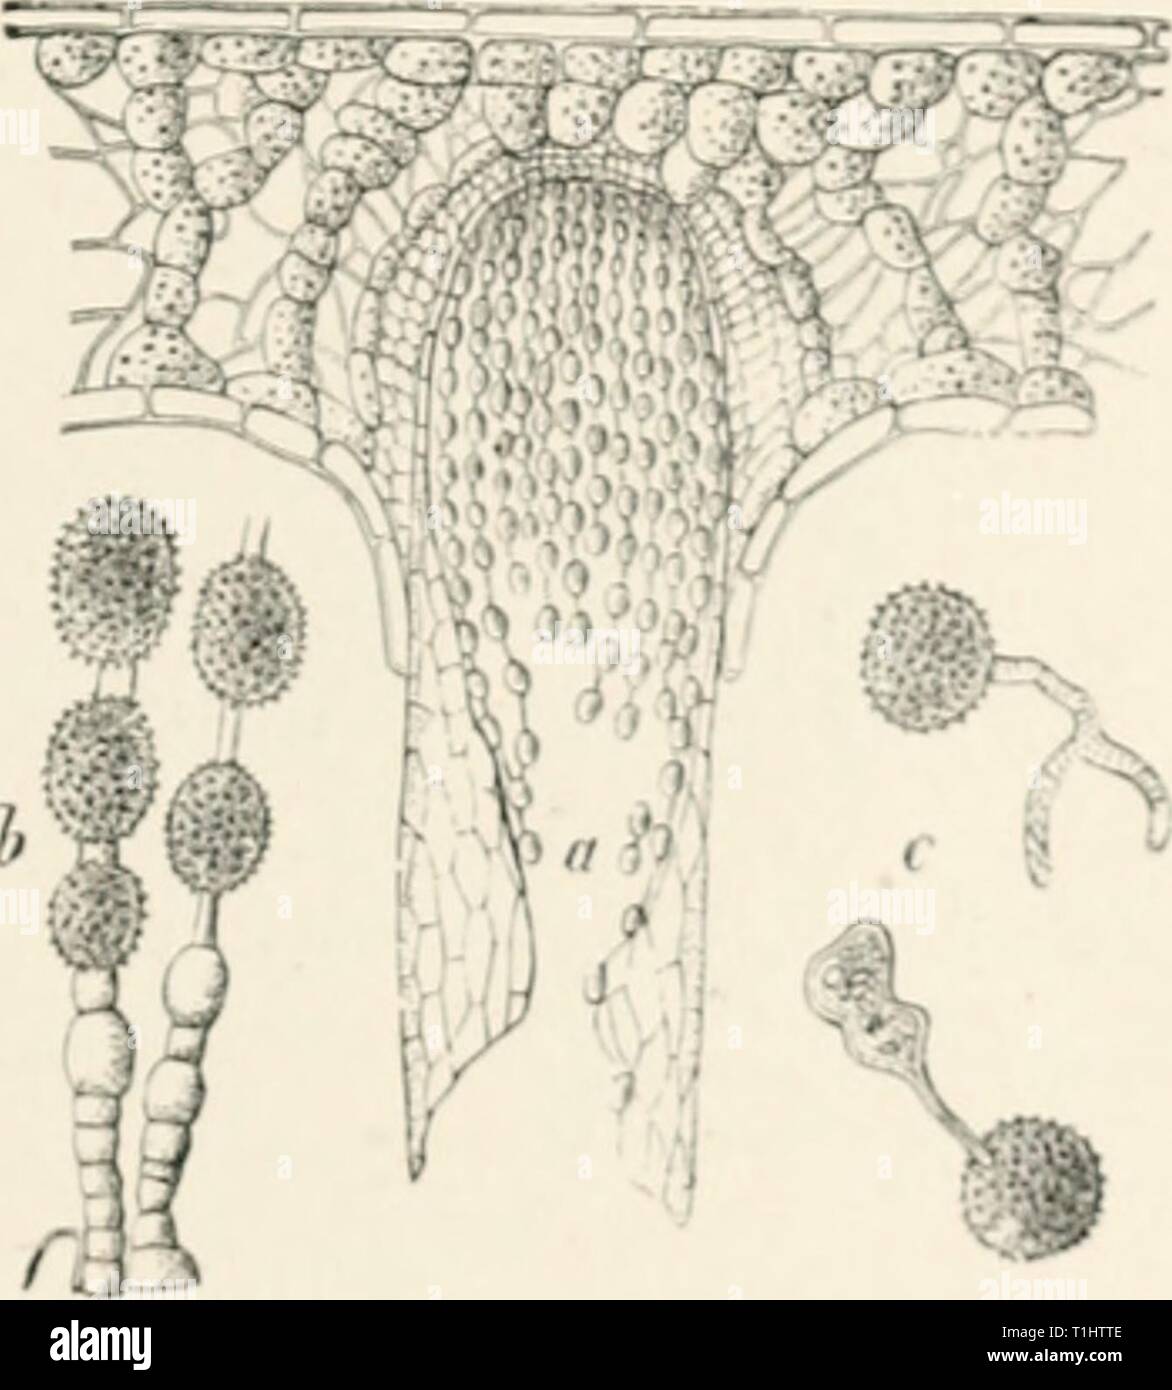 Diseases of plants induced by Diseases of plants induced by cryptogamuc parasites; introduction to the study of pathogenic fungi, slime-fungi, bacteria, and algae. English ed. by William G. Smith  diseasesofplants00tubeuoft Year: 1897  Fig. 205.âCnh/ptottpo'a Gotppertiano. Aecidia on the under surface of needles of Silver Fir. (v. Tubeuf del.)    Kiii. 20d.âAecidiuin in a needle of Silver Fir (much enlarjjed). h. Series of aecidiospores and intermediate cells. 'â , (icniiinatin' aecidiospores. (.ftcr R. HartiK.) This aecidium is also fouml on Alii&lt;s rrfi/K'/onini in I'jiju'r iJavaria. Barc Stock Photo